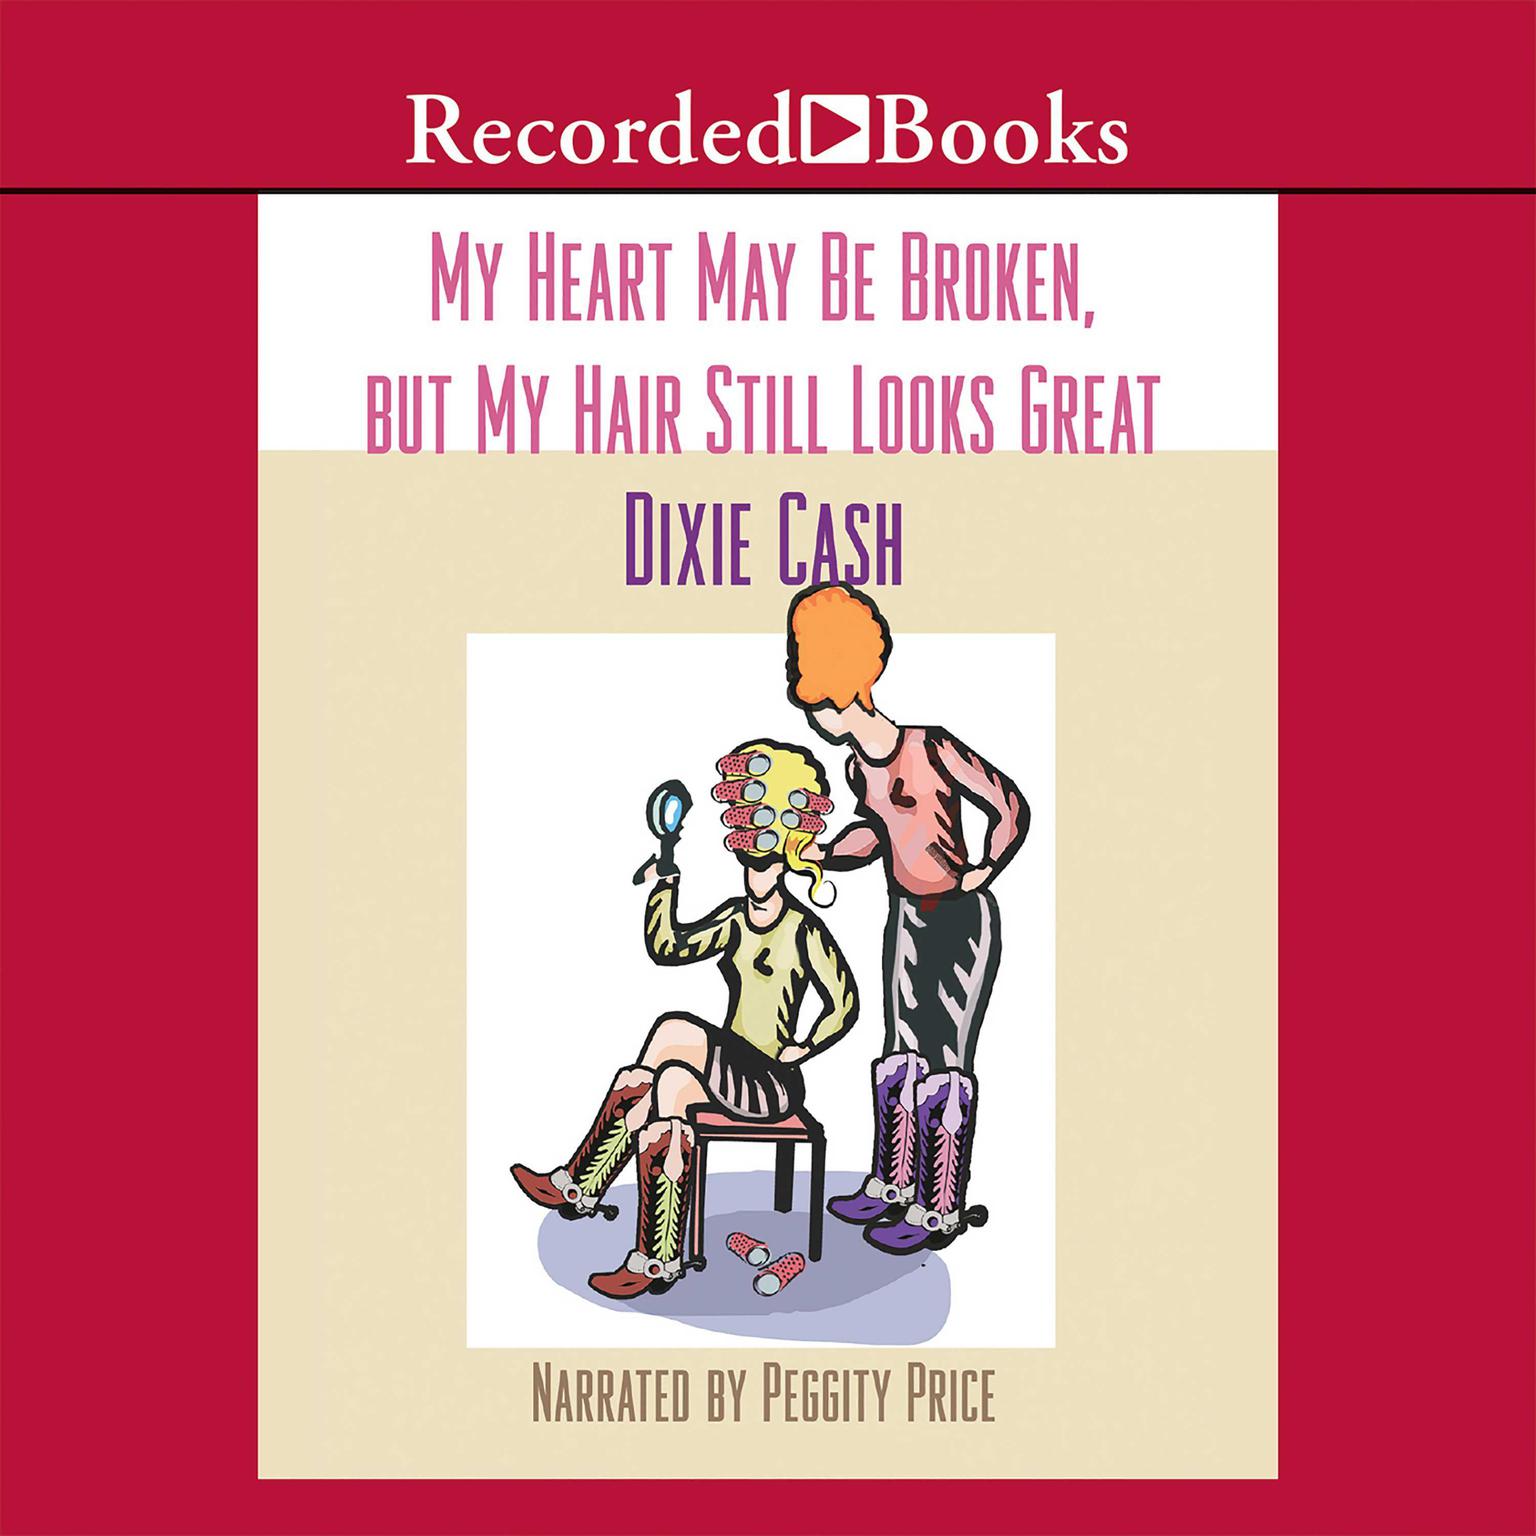 My Heart May Be Broken, but My Hair Still Looks Great Audiobook, by Dixie Cash